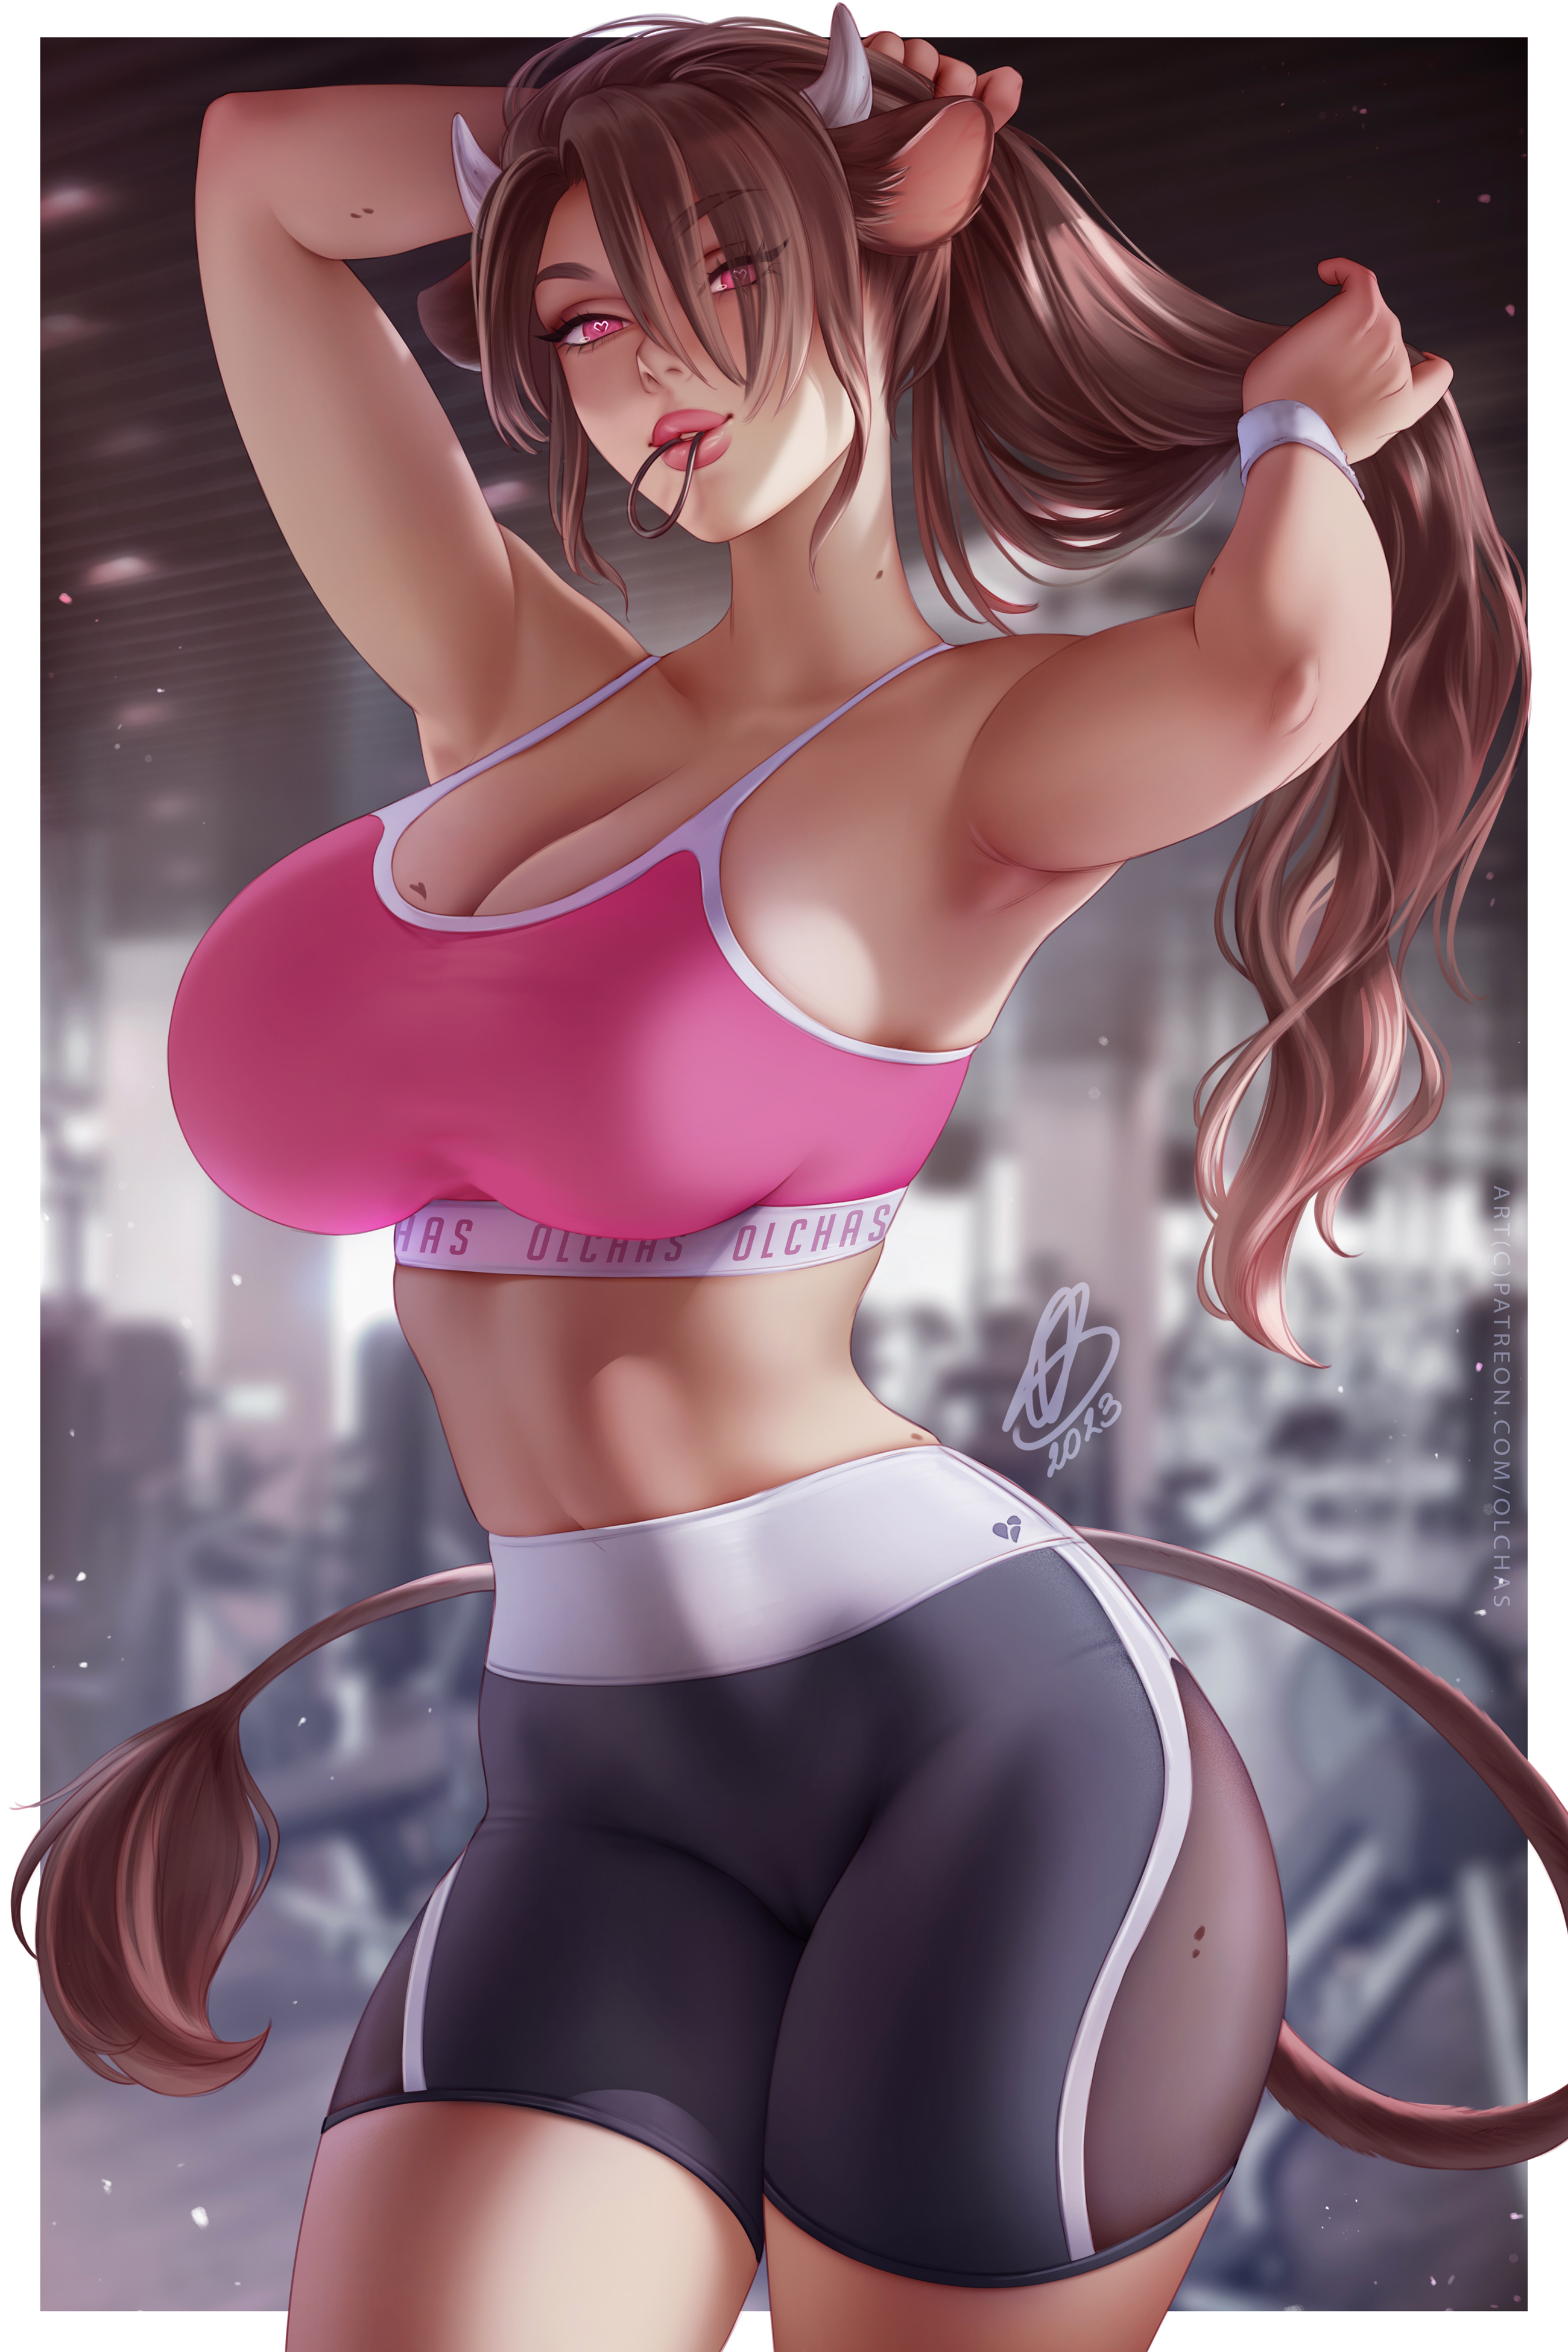 General 2600x3900 Mui (OC) original characters fantasy girl cow girl animal ears gyms sportswear artwork drawing OlchaS portrait display long hair looking at viewer Cow tail armpits sports bra sports shorts big boobs watermarked